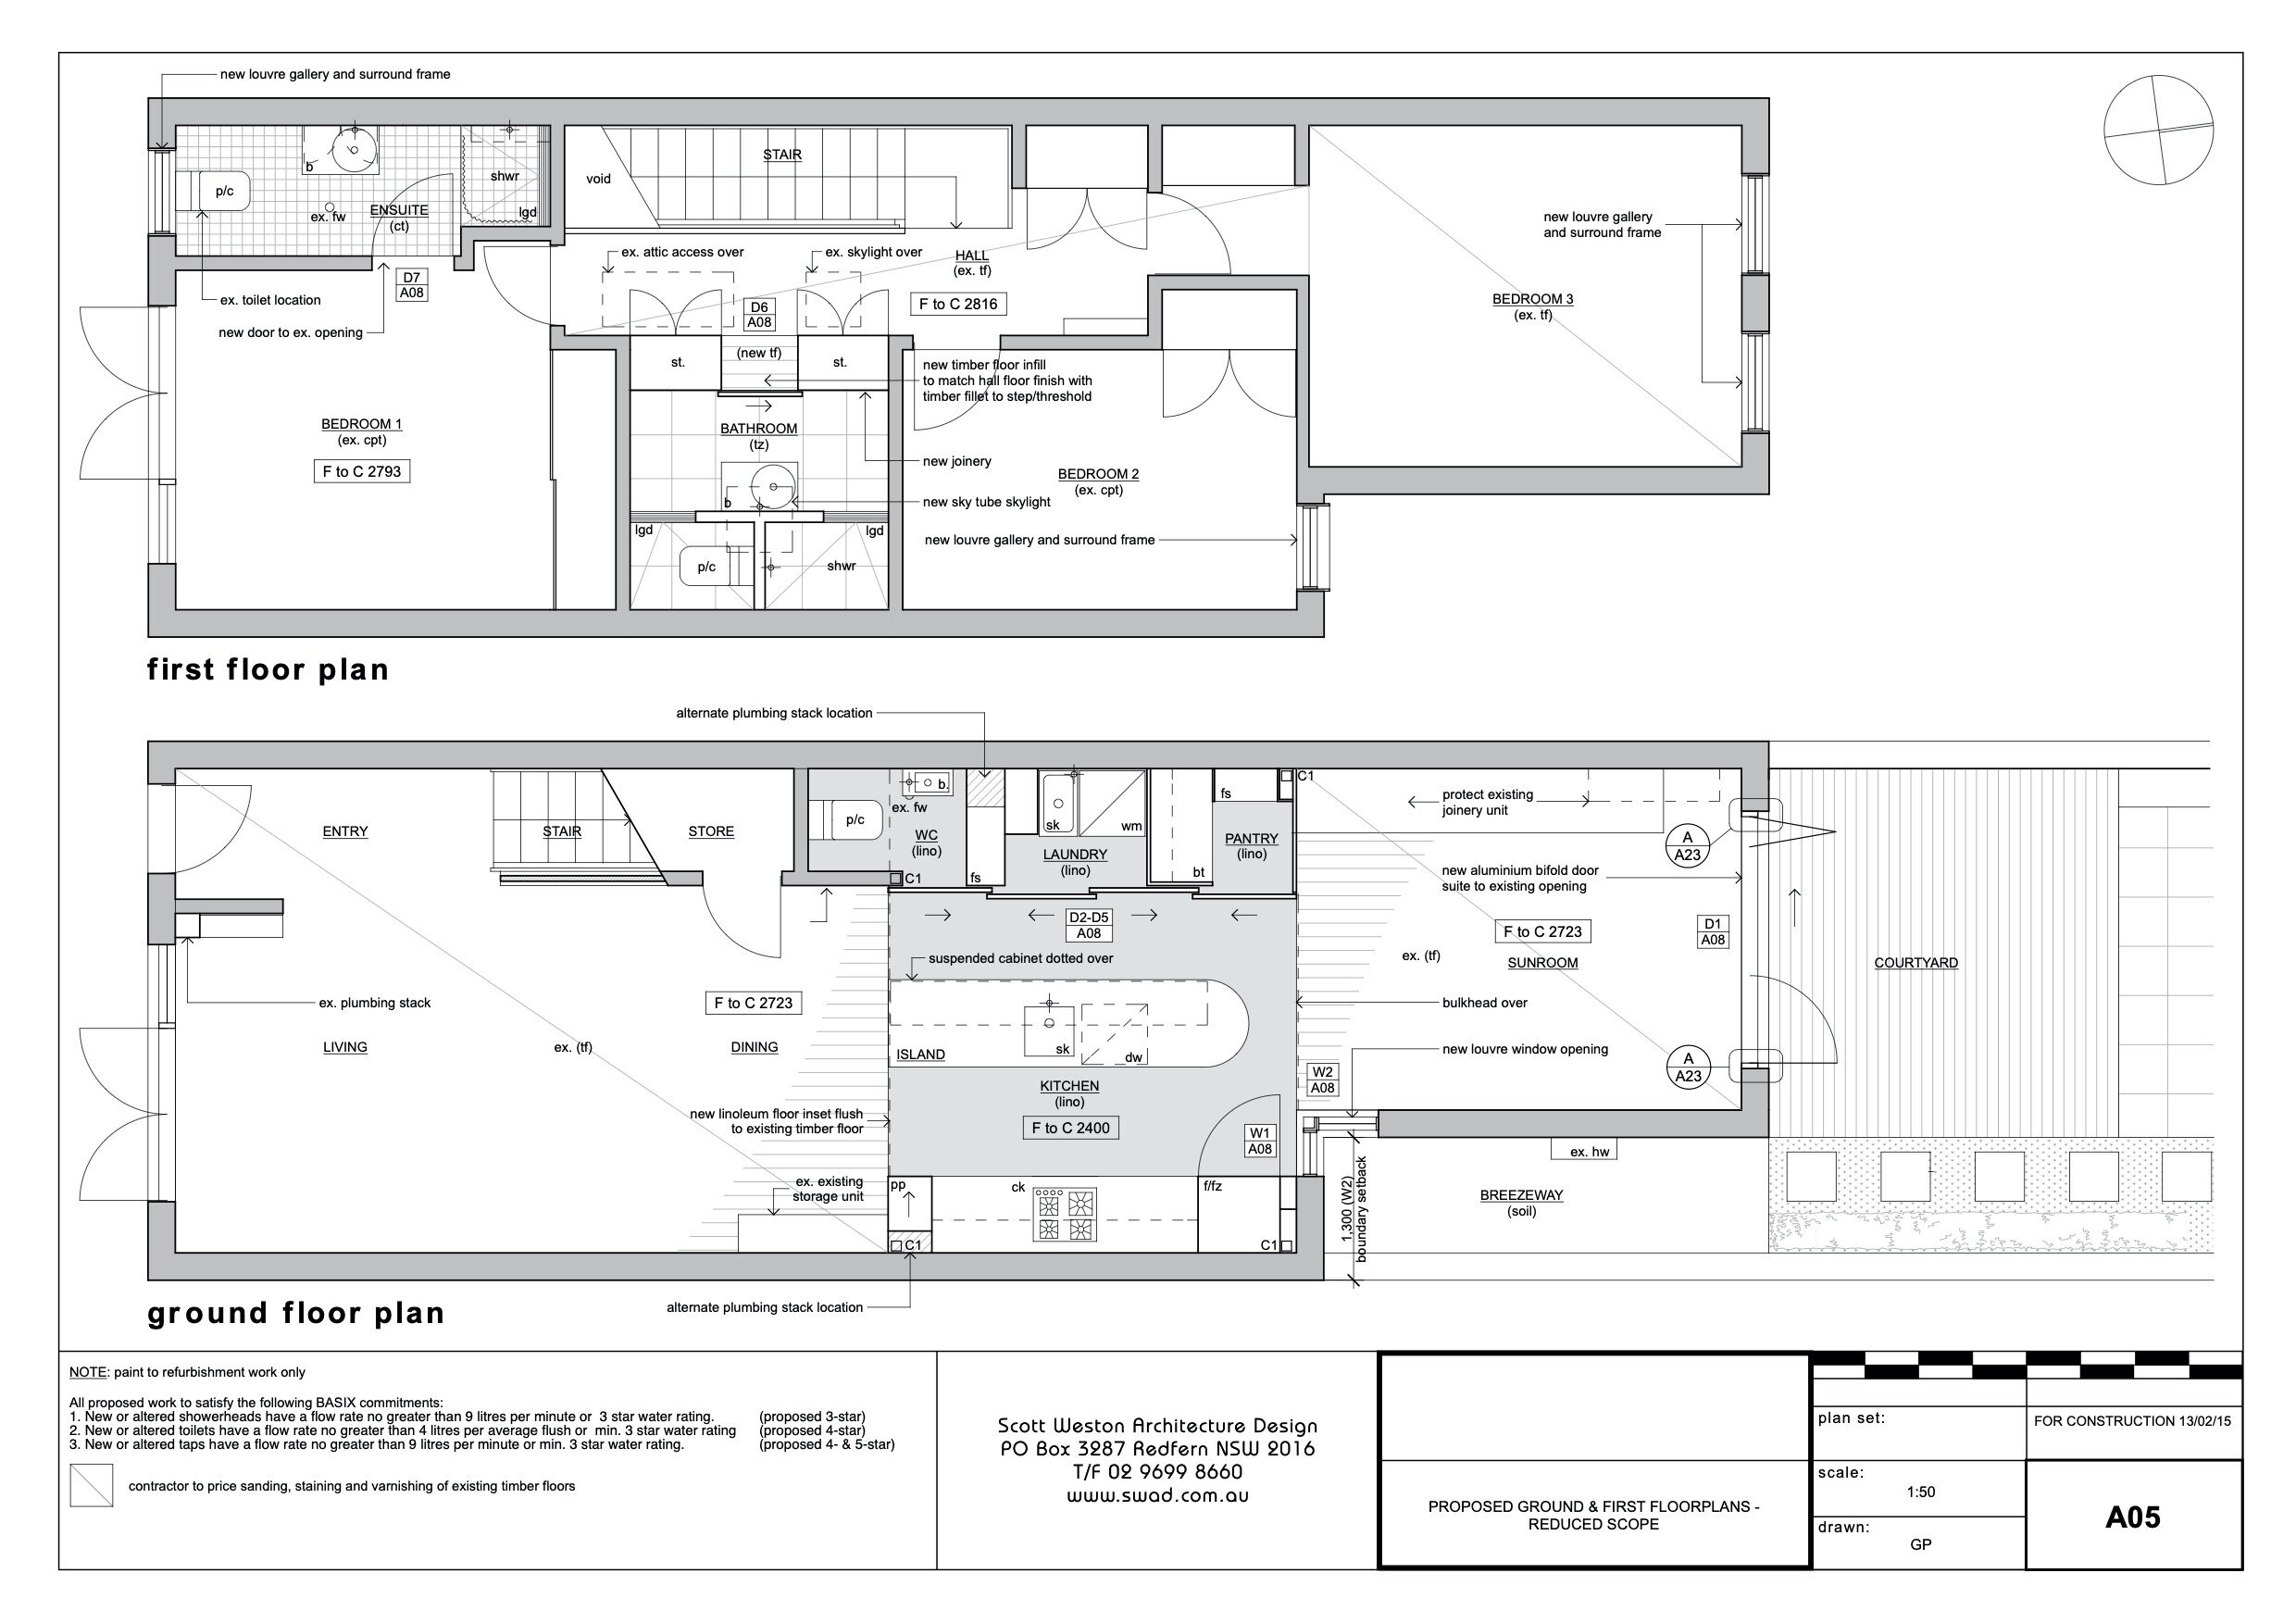 A05 PROPOSED GROUND & FIRST FLOORPLANS - REDUCED SCOPE.jpeg